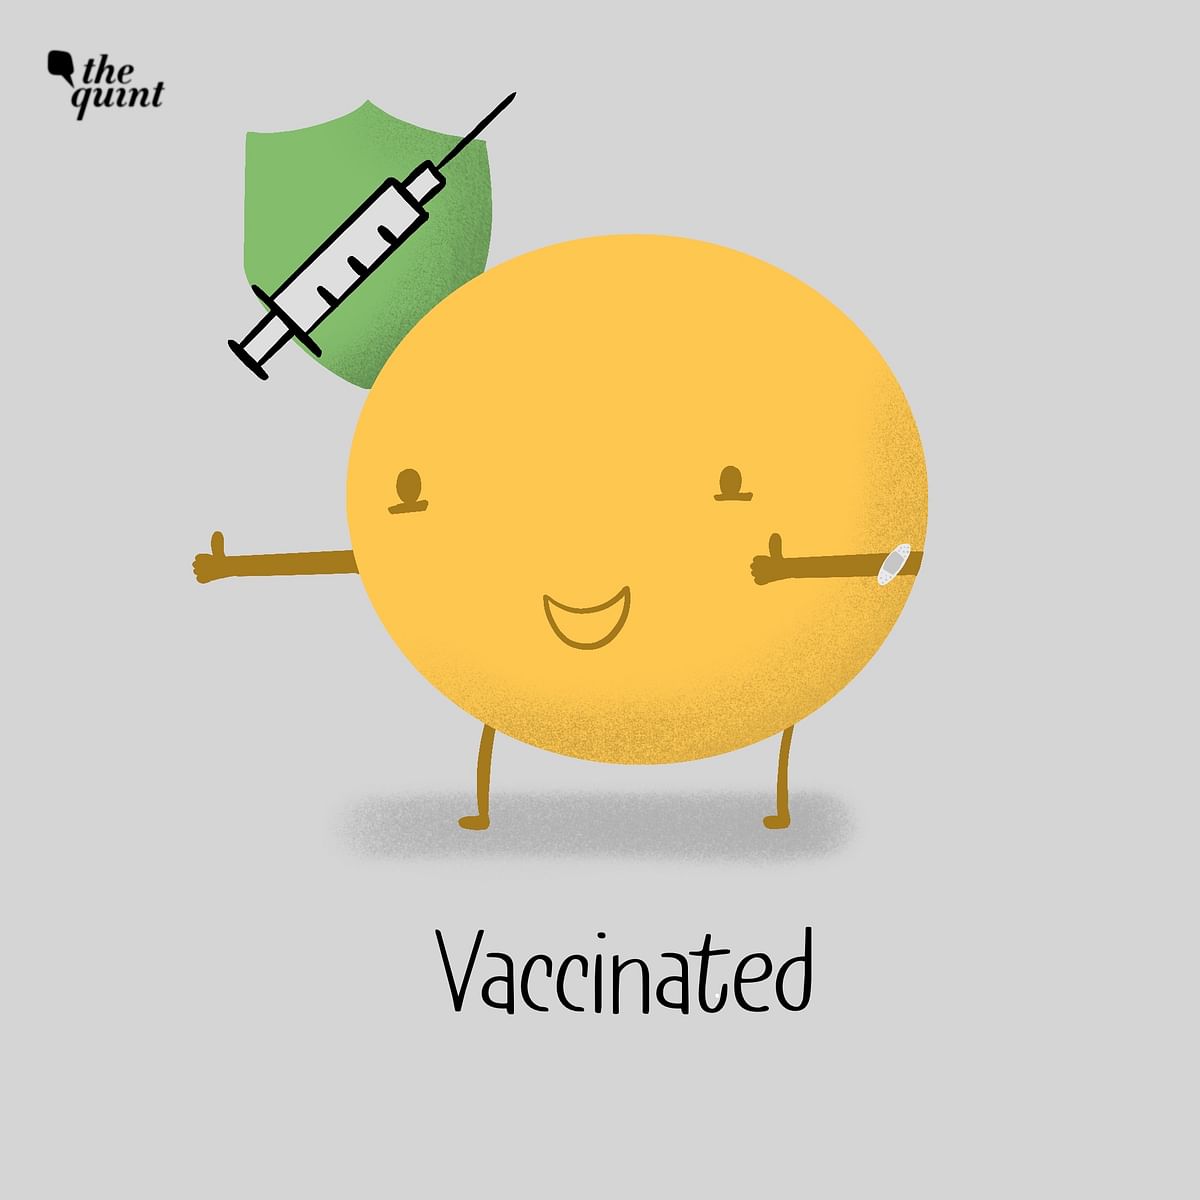 On World Emoji Day, here are some post-pandemic emojis that we can use to express ourselves.